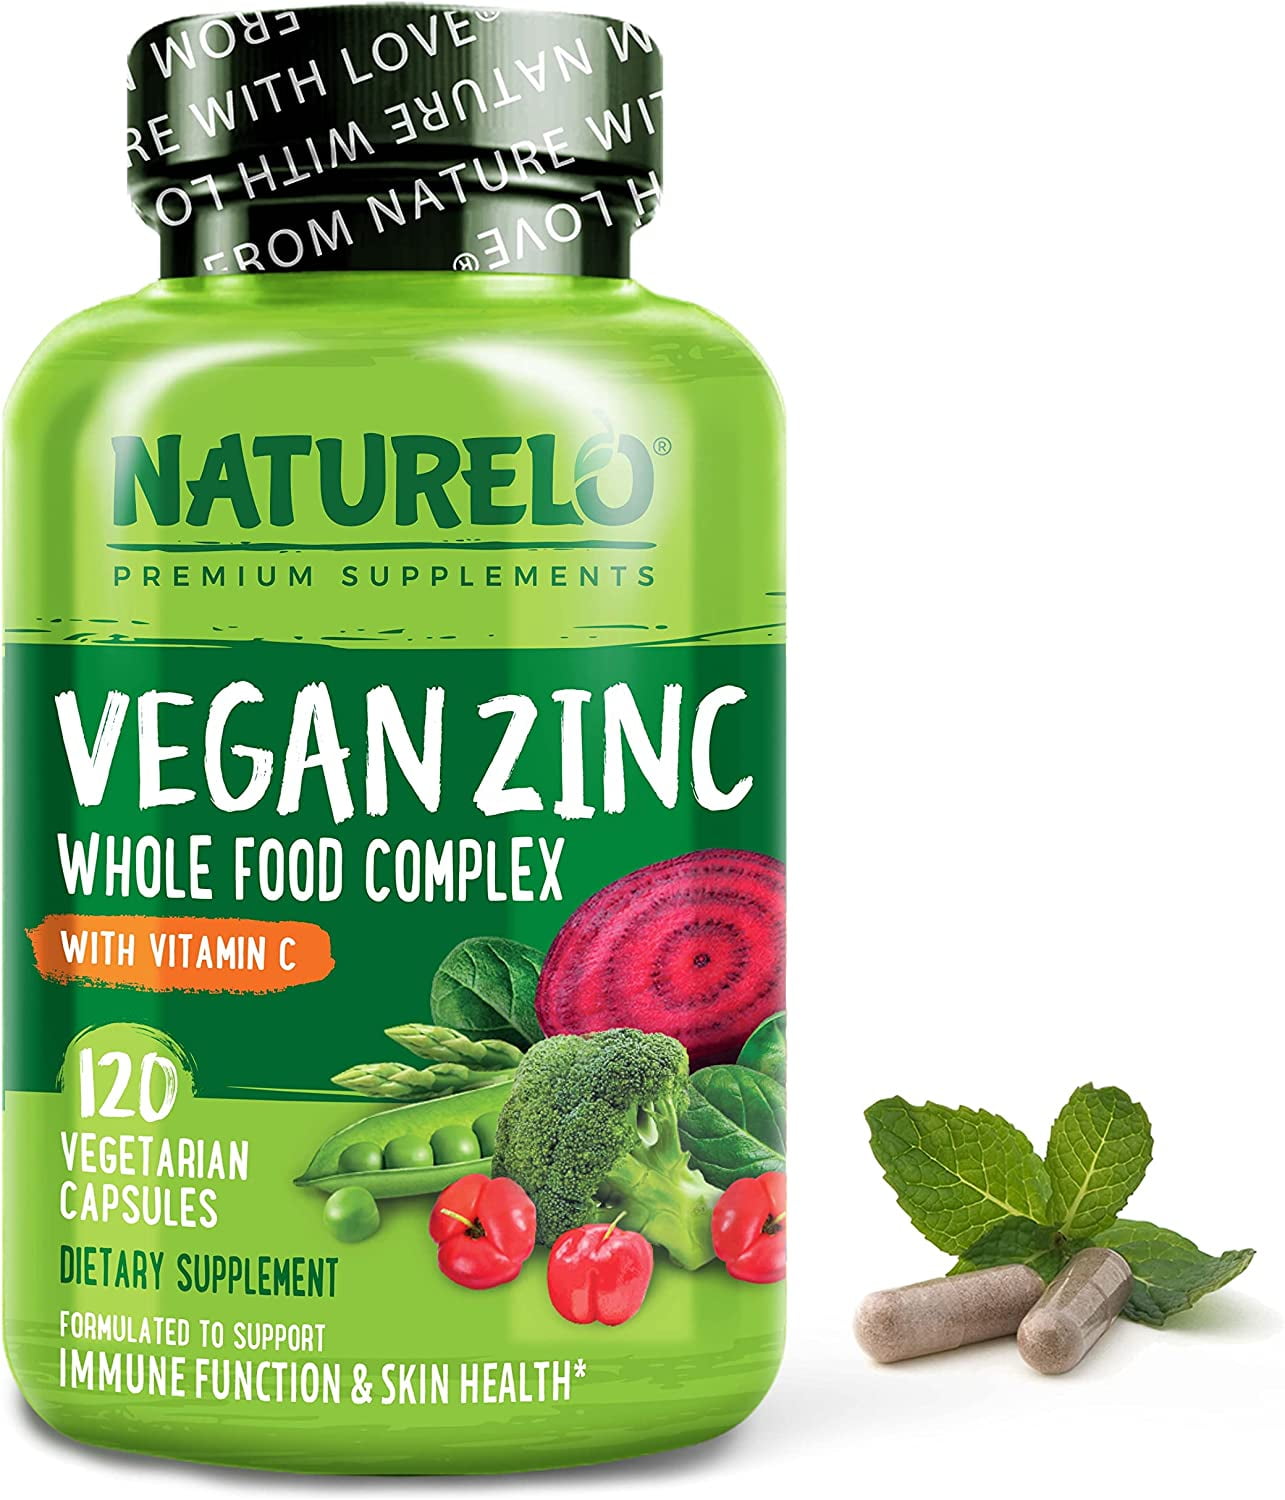 NATURELO Vegan Zinc Whole Food Complex Supplement with Vitamin C for Immune  Support and Healthy Skin, Hair, and Nails - 120 Capsules 